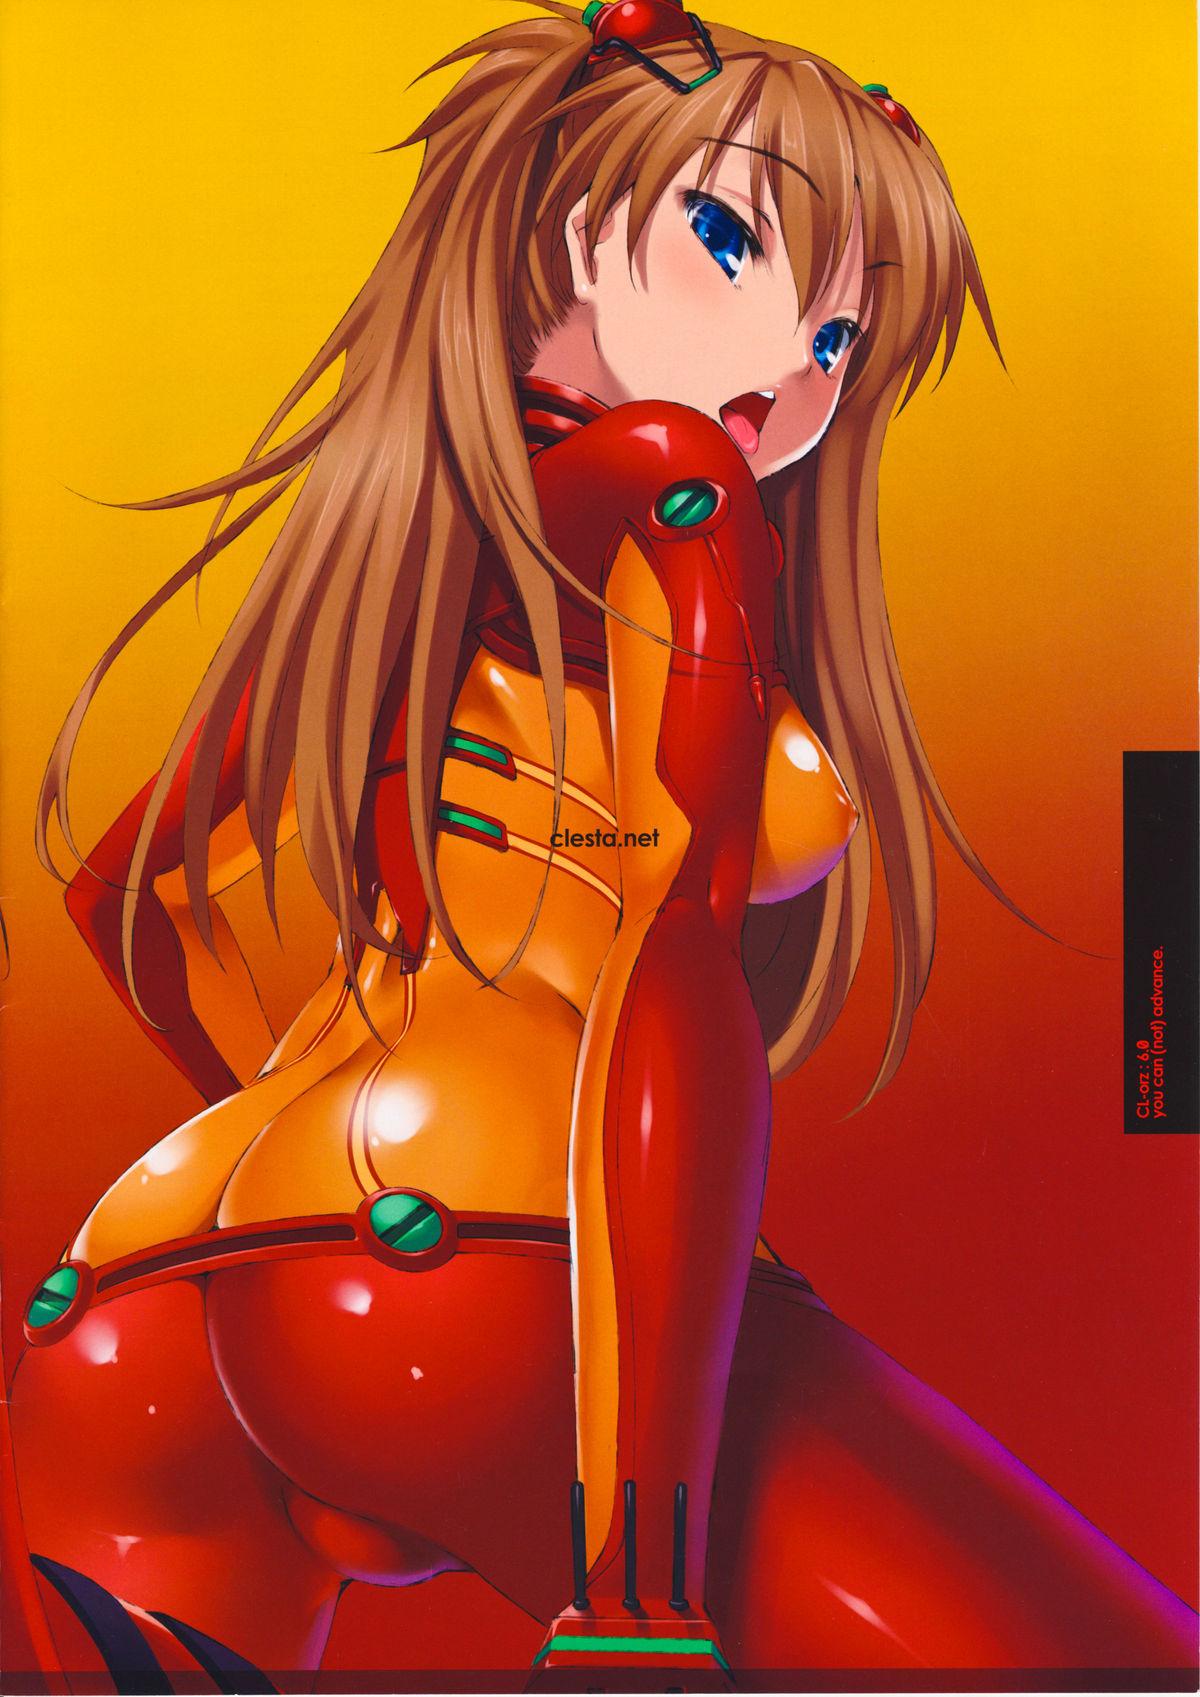 (C76) [Clesta (Cle Masahiro)] CL-orz 6.0 you can (not) advance. (Rebuild of Evangelion) [Decensored] 15